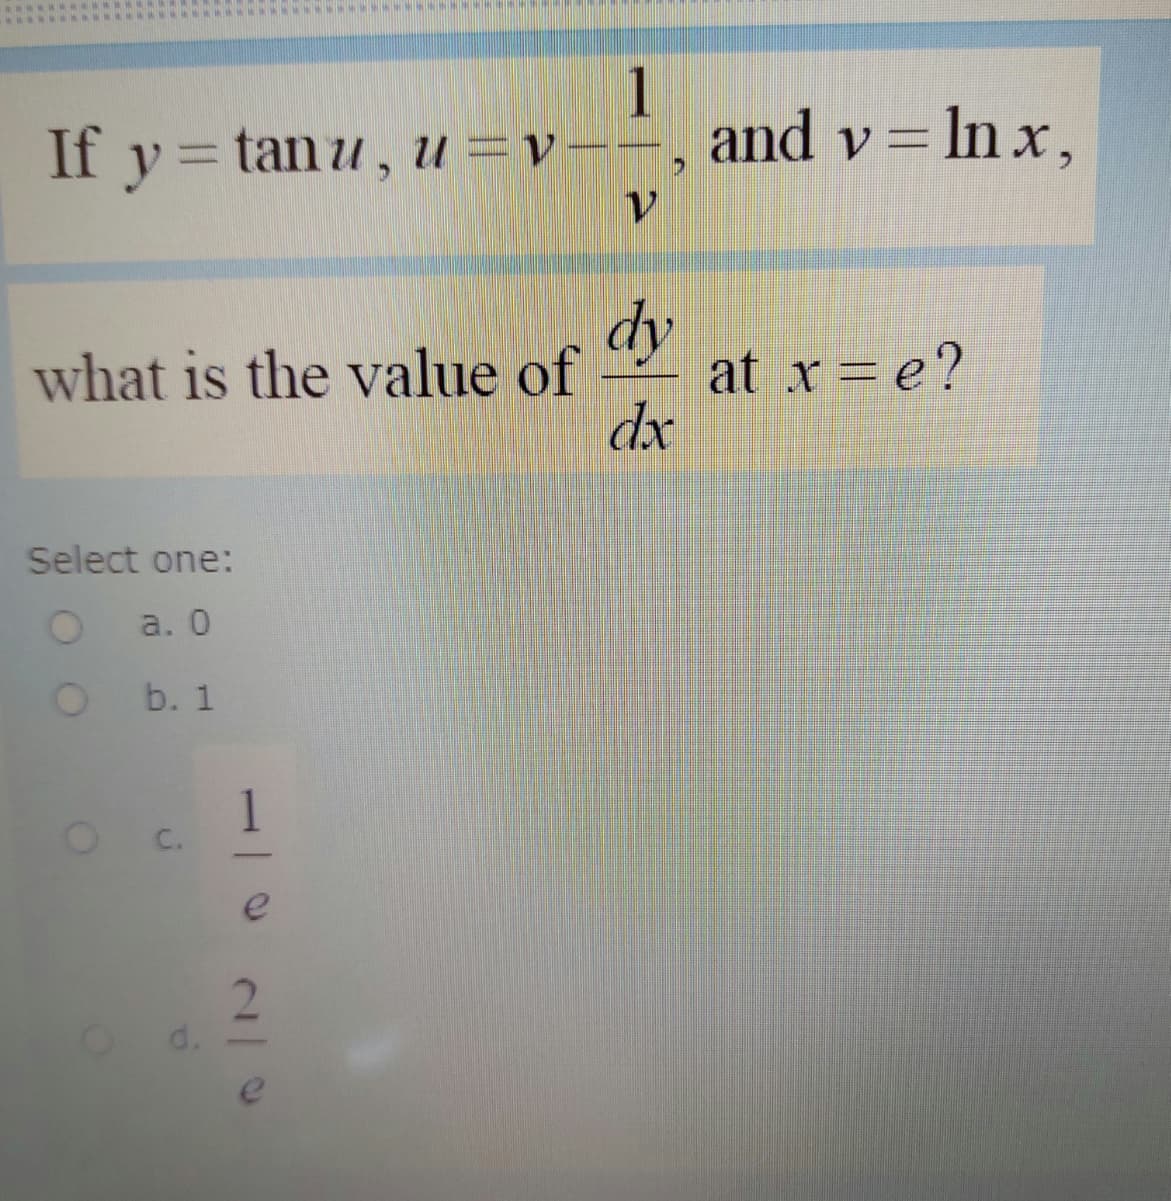 ww..N
1
and v= In x,
If y = tanu, u =v--
dy
at x = e?
dx
what is the value of
Select one:
a. 0
b. 1
1
C.
e
2.
d.
